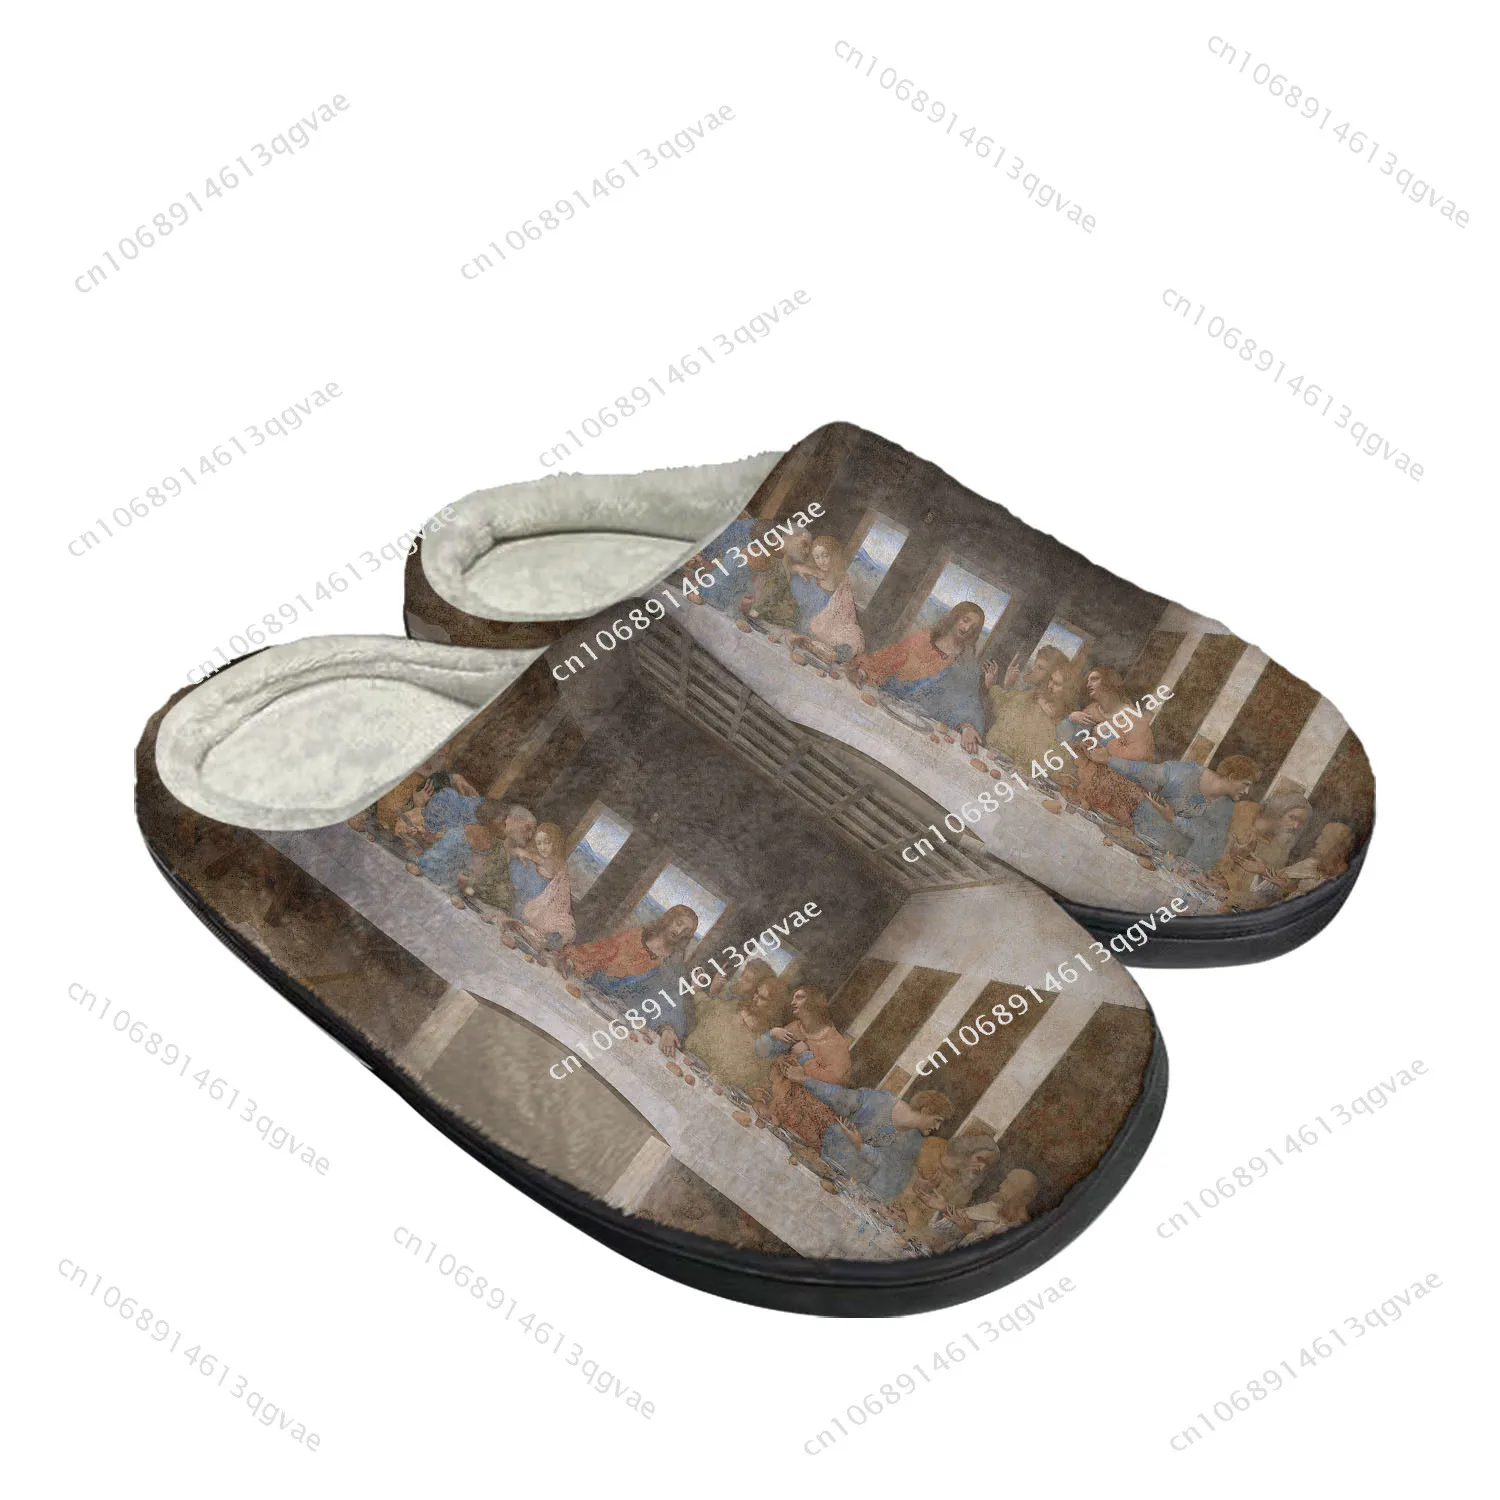 

Da Vinci Last Supper Home Cotton Slippers Mens Womens Plush Bedroom Keep Warm Shoes Thermal Indoor Slipper Customized Shoe